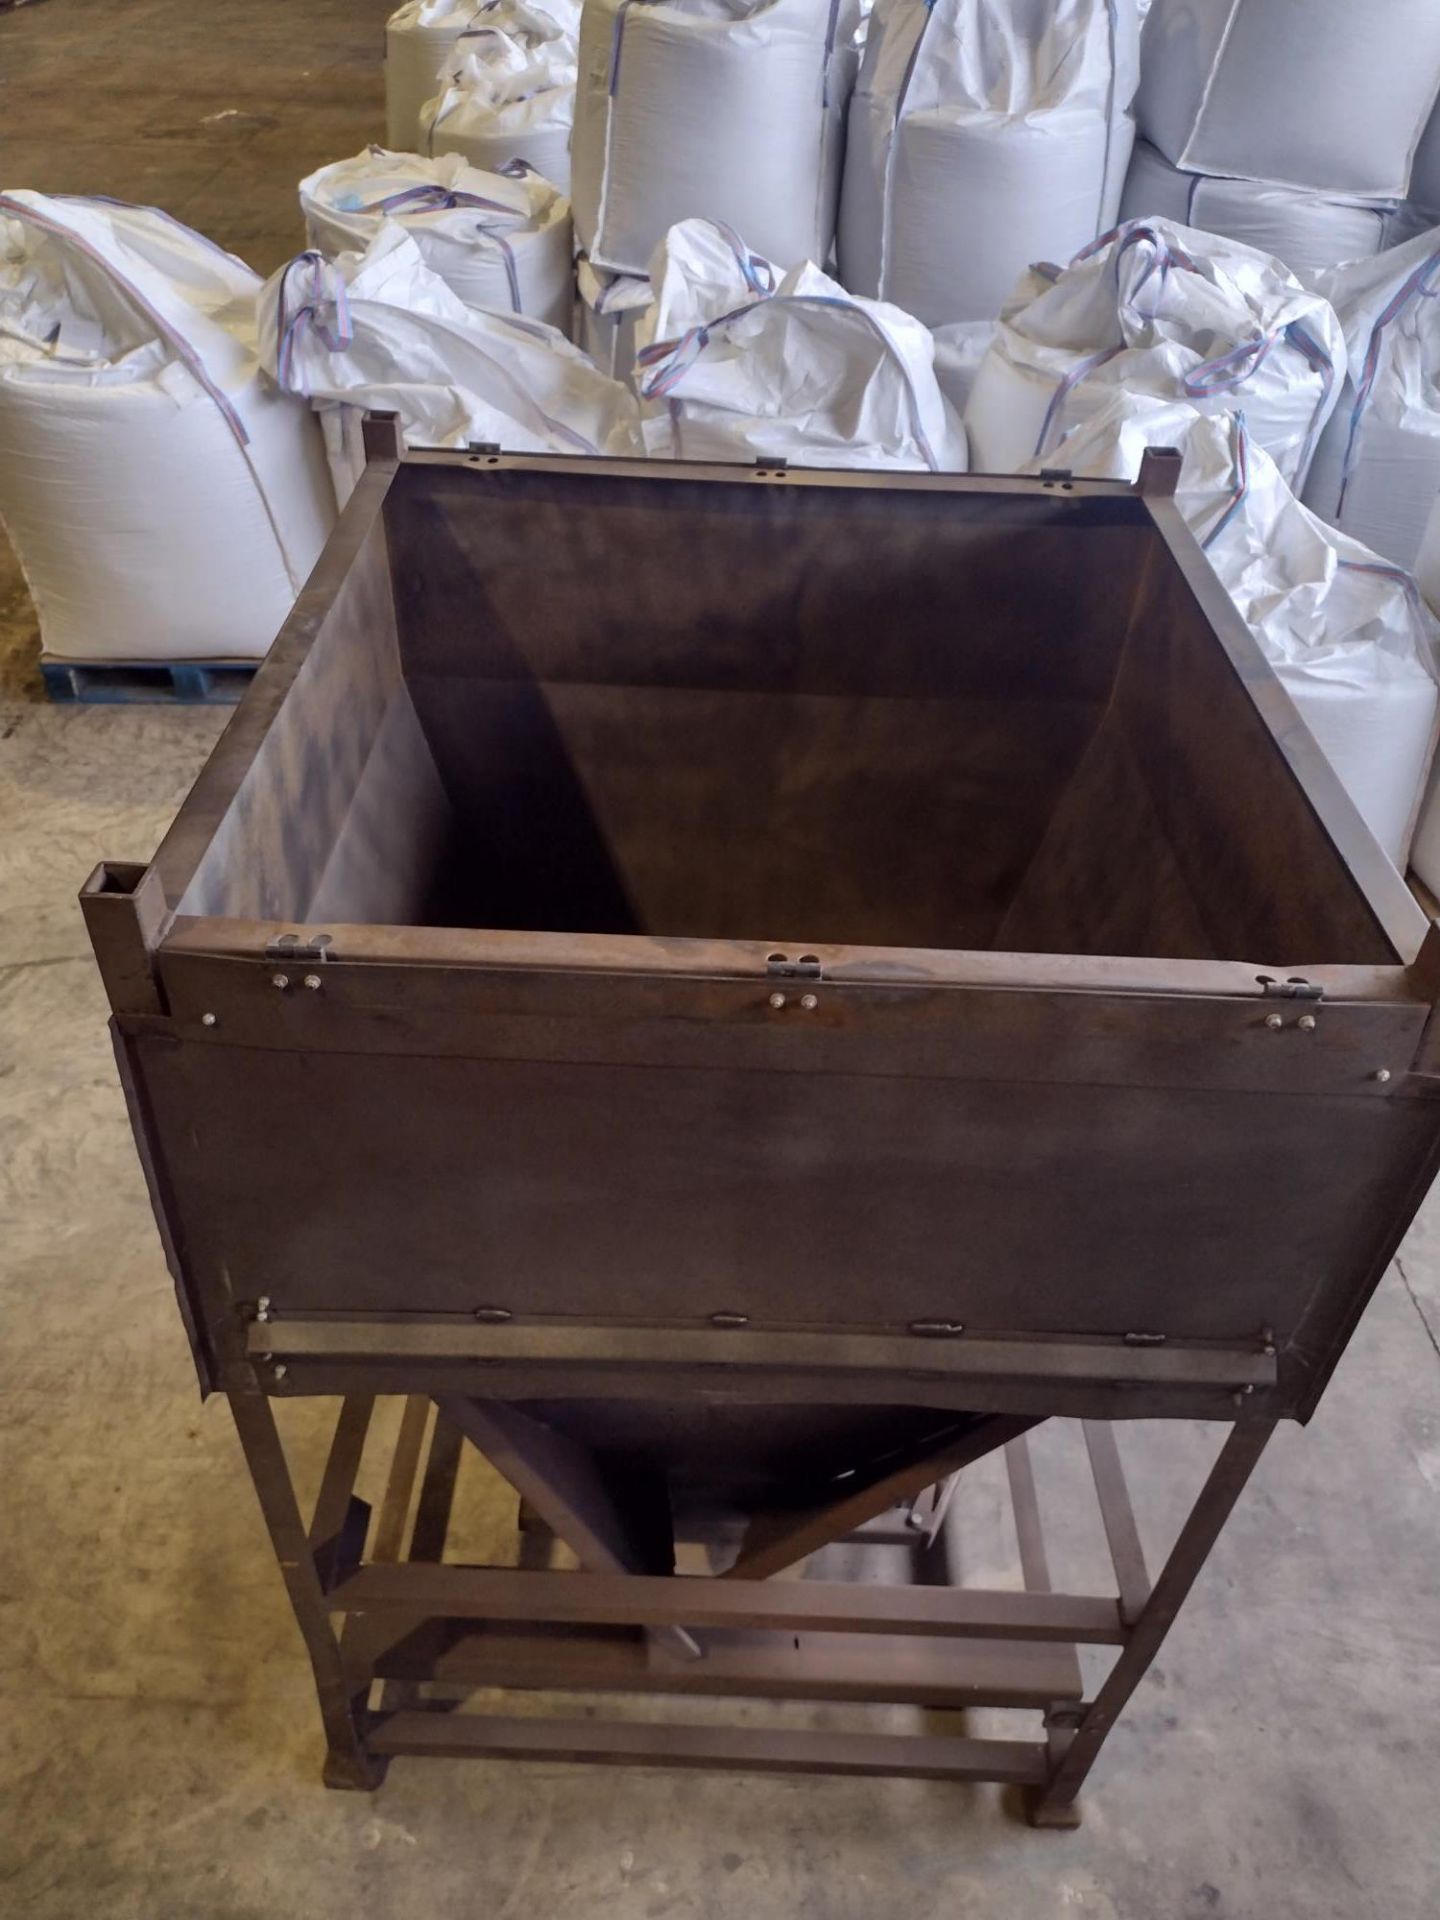 TEN HOPPER BOTTOMED TOTE BINS, approx. 1285mm x 1285mm x 1950mm. Lot located Bretherton, Lancashire. - Image 2 of 3